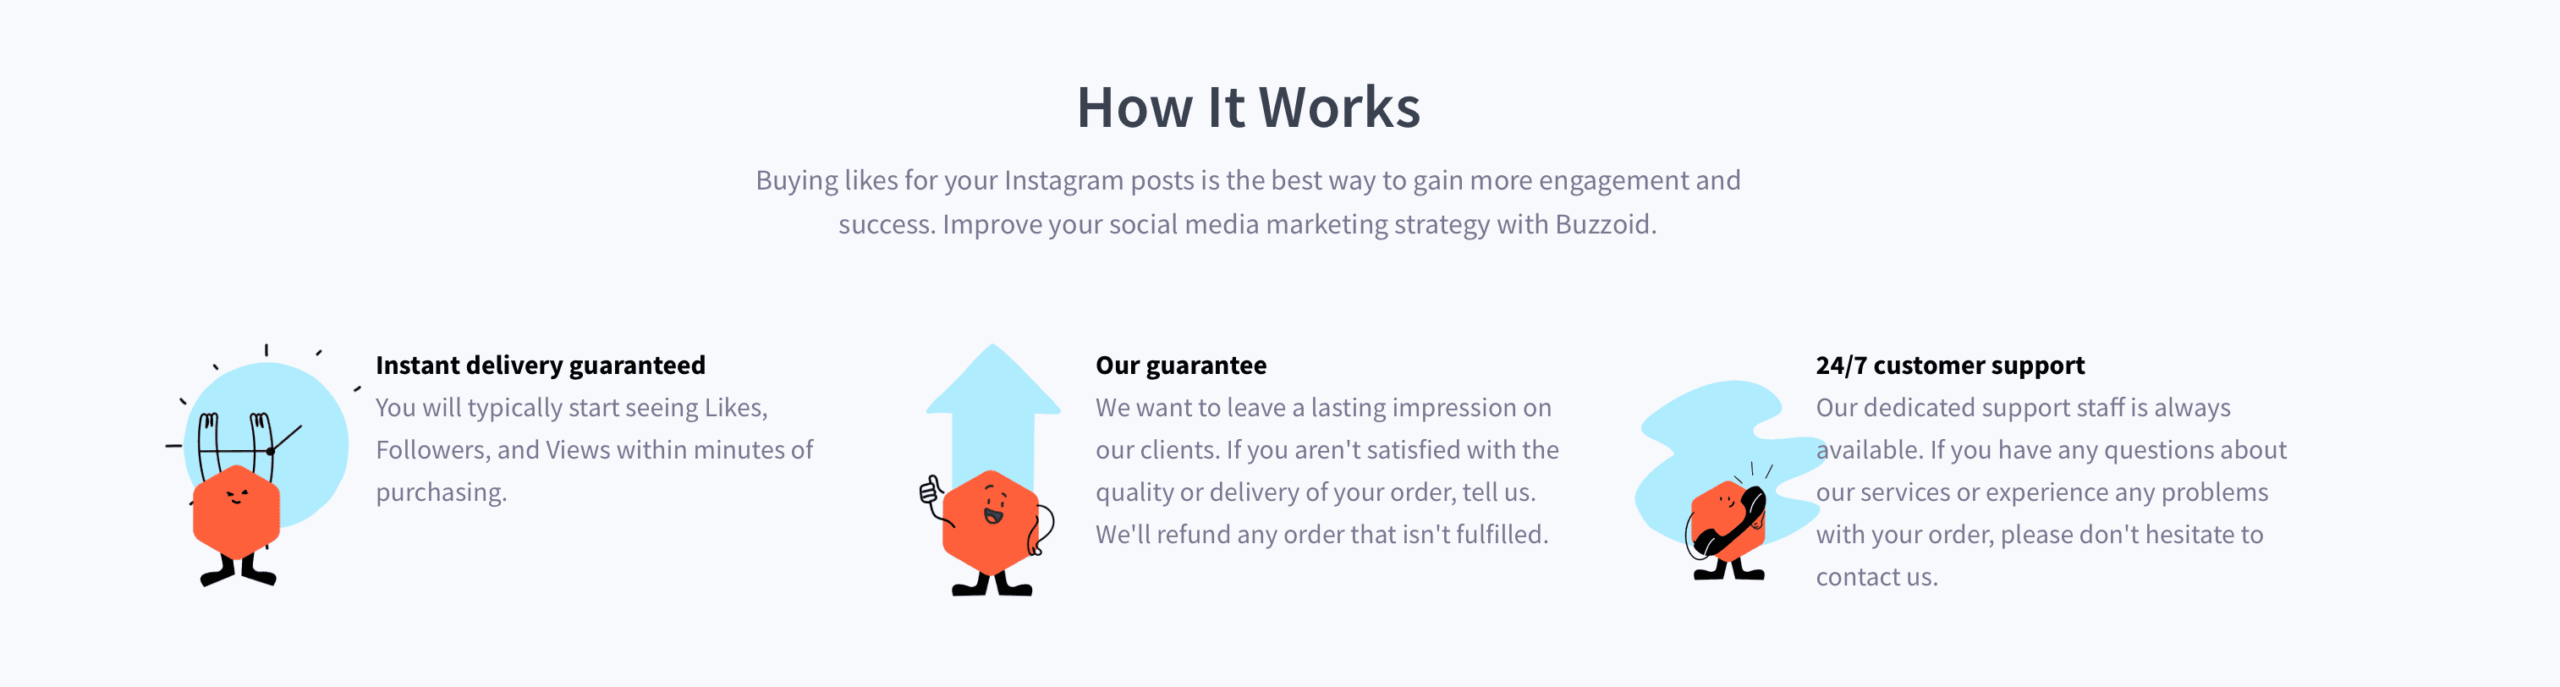 how-it-work-single-review-buzzoid